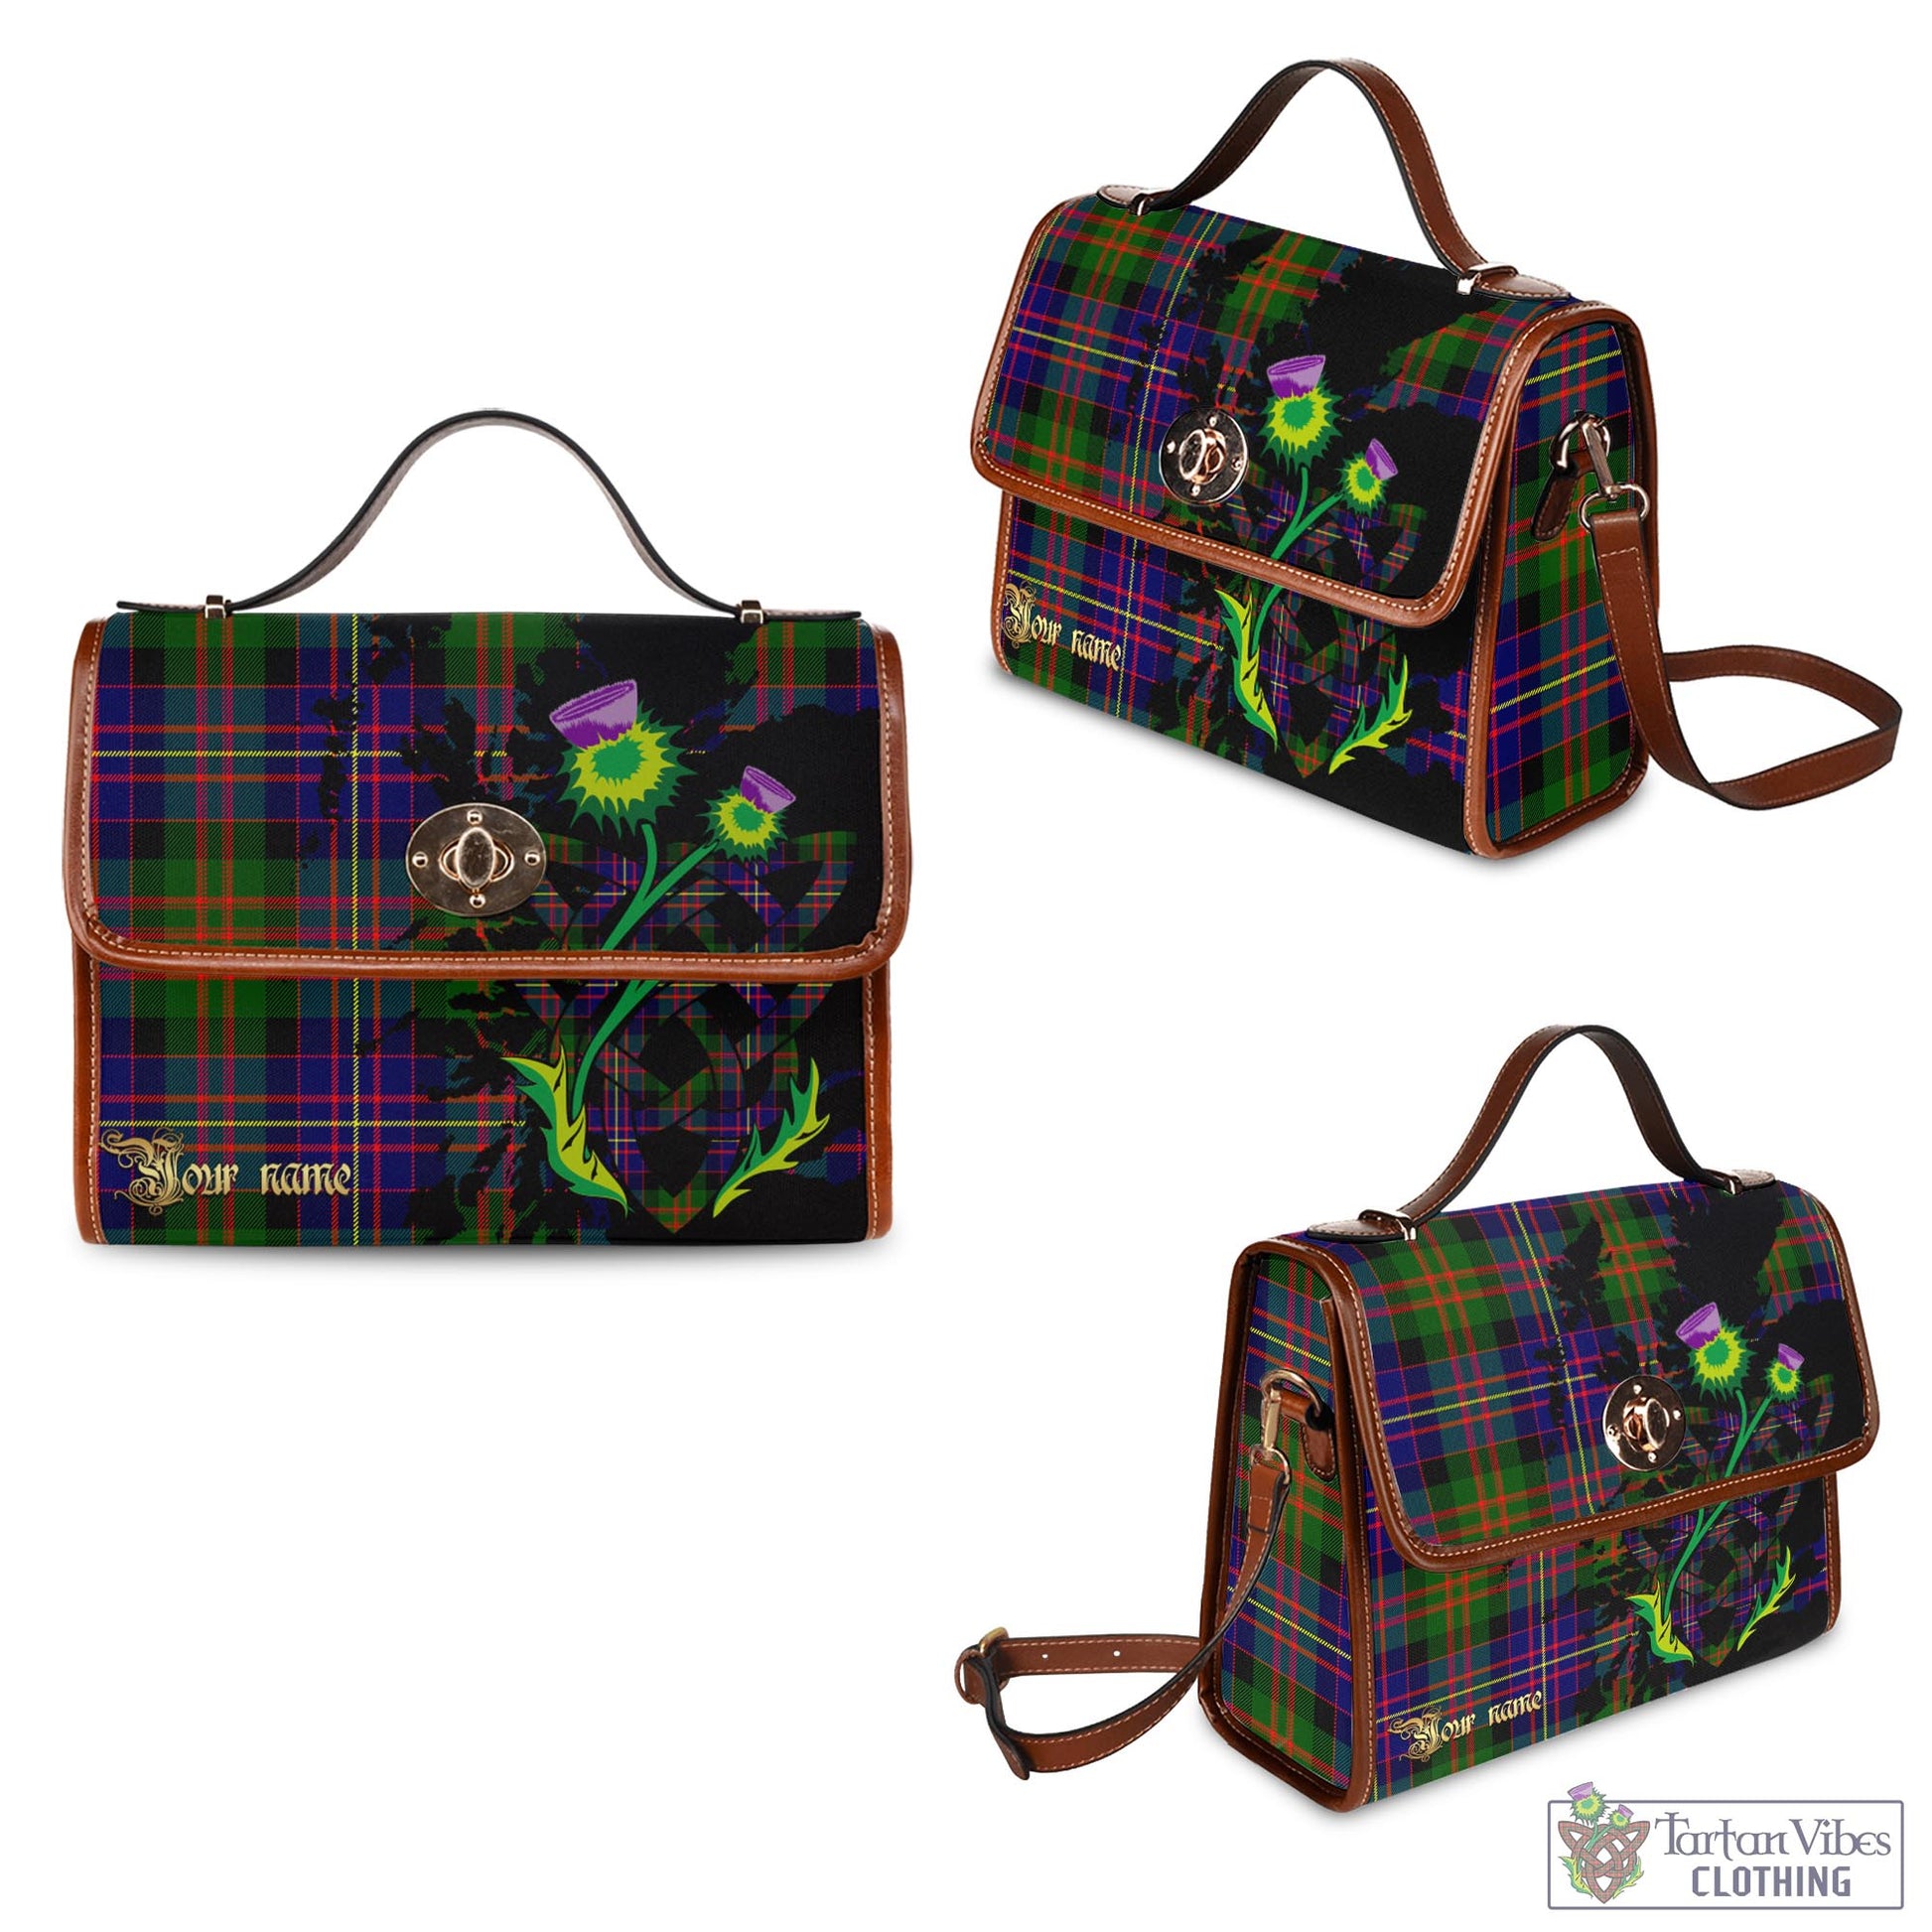 Tartan Vibes Clothing Chalmers Modern Tartan Waterproof Canvas Bag with Scotland Map and Thistle Celtic Accents